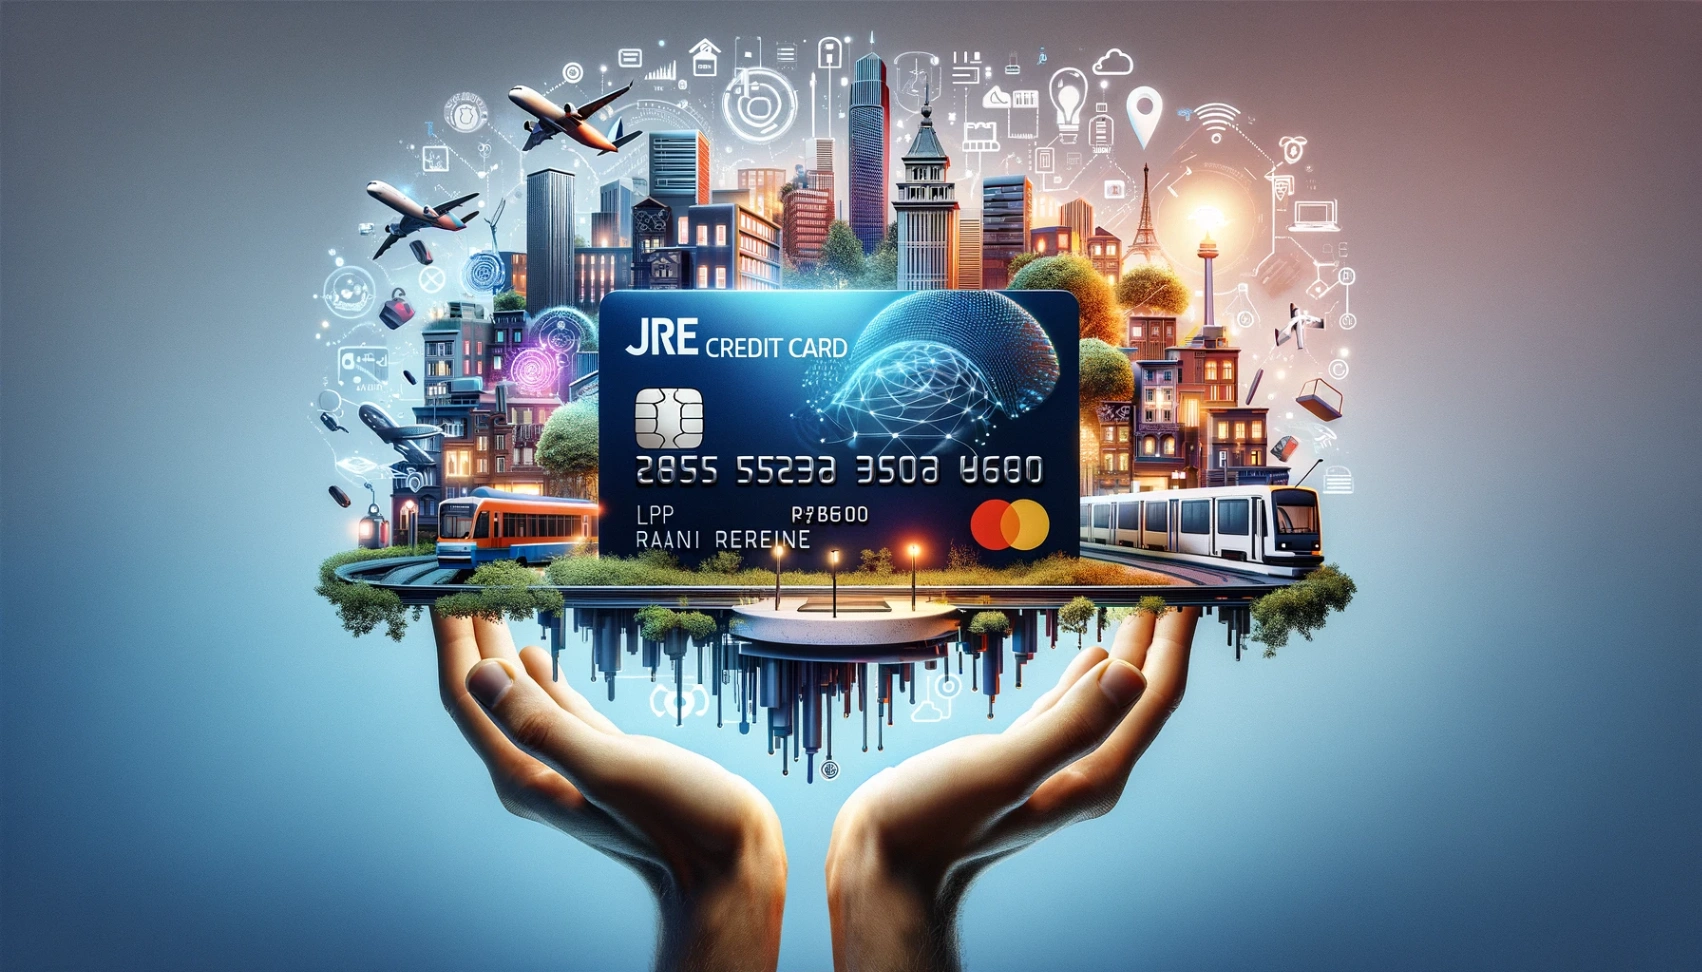 JRE Credit Card - How to Apply Online Decoded